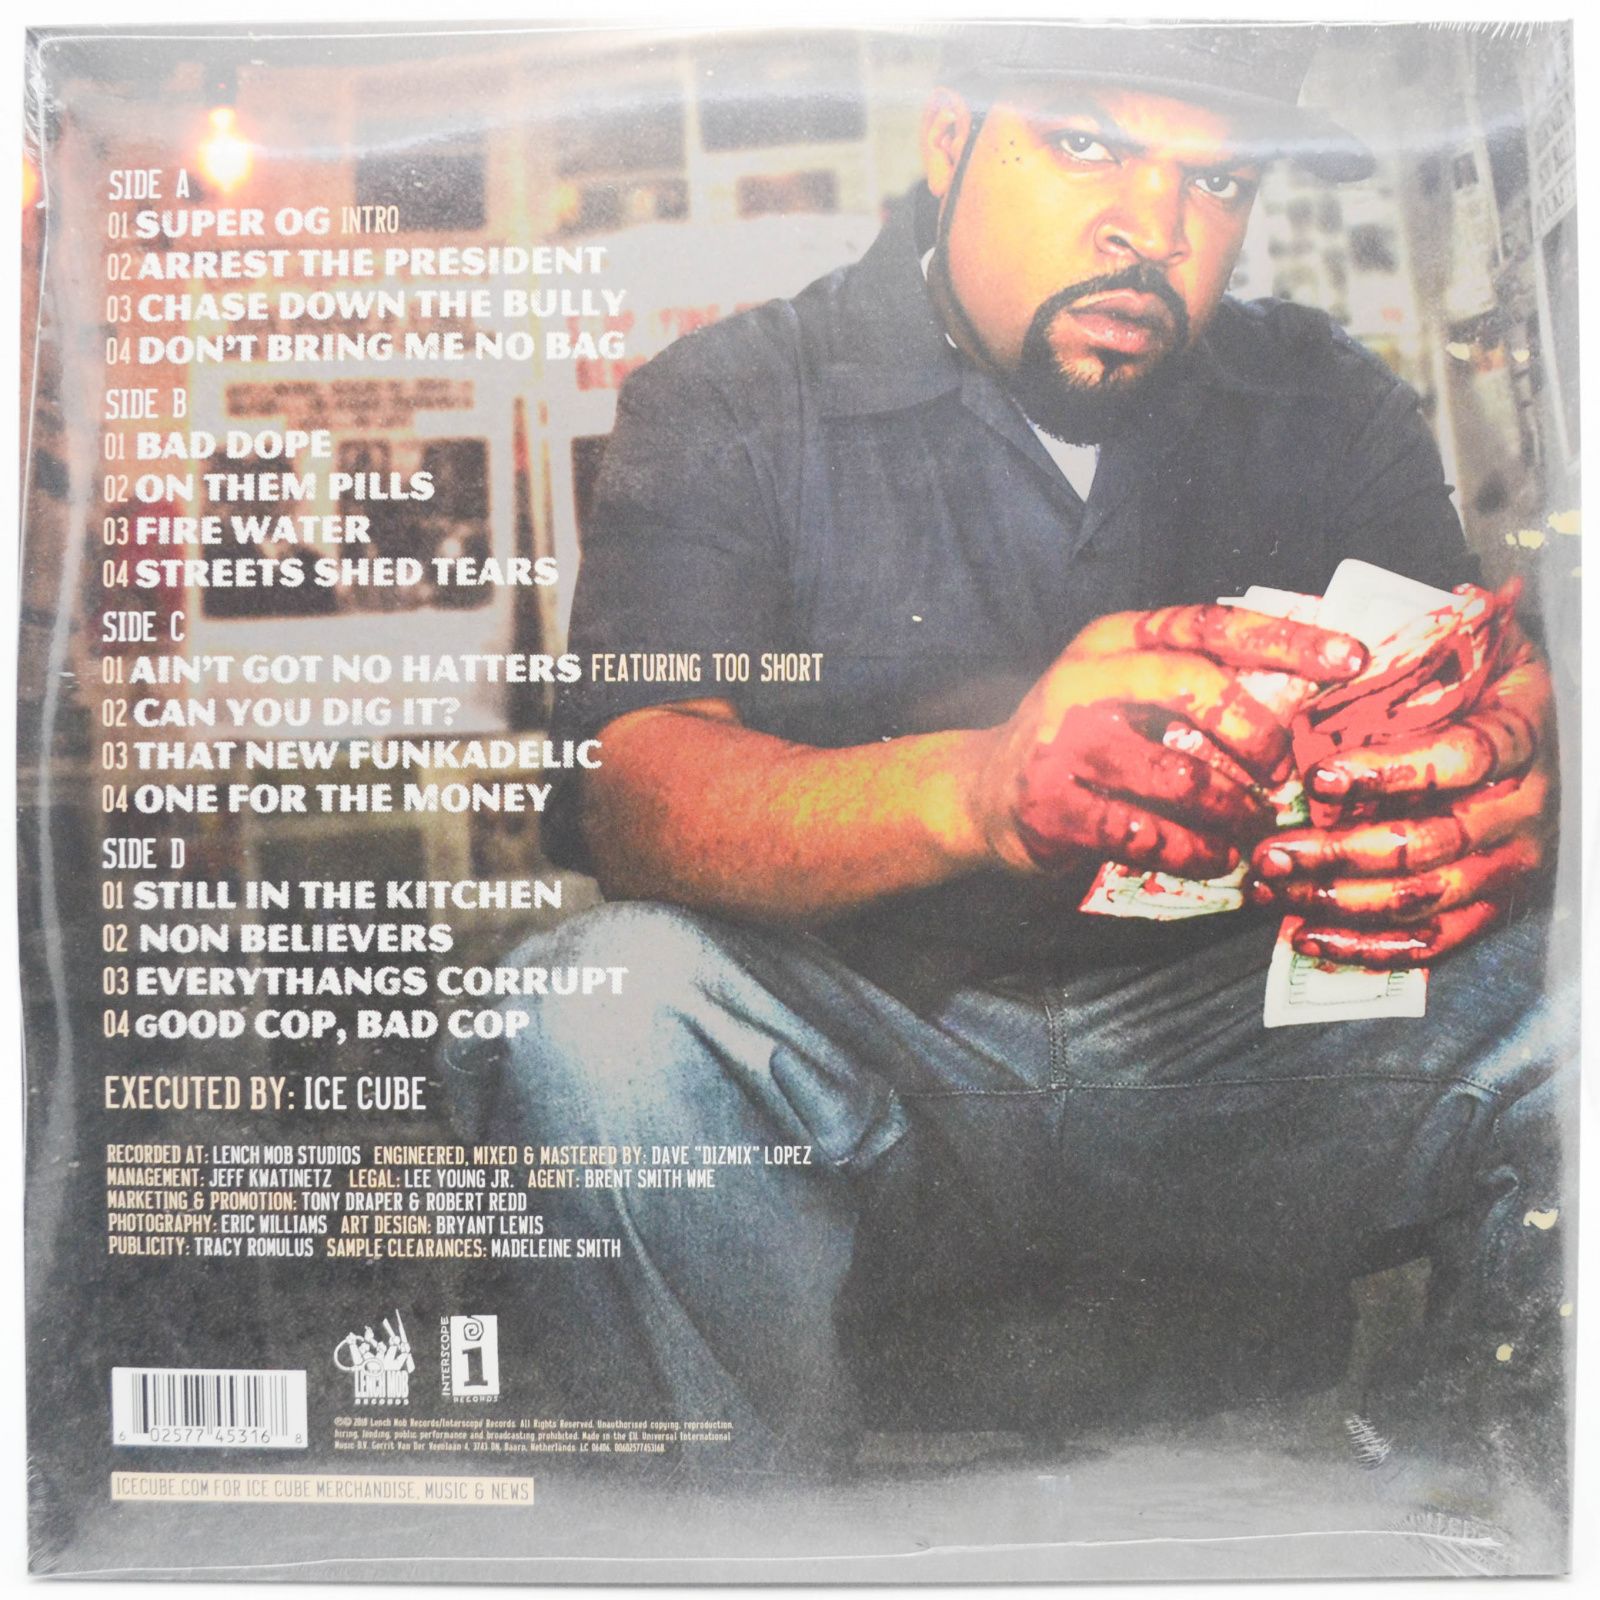 Ice Cube — Everythangs Corrupt (2LP), 2018